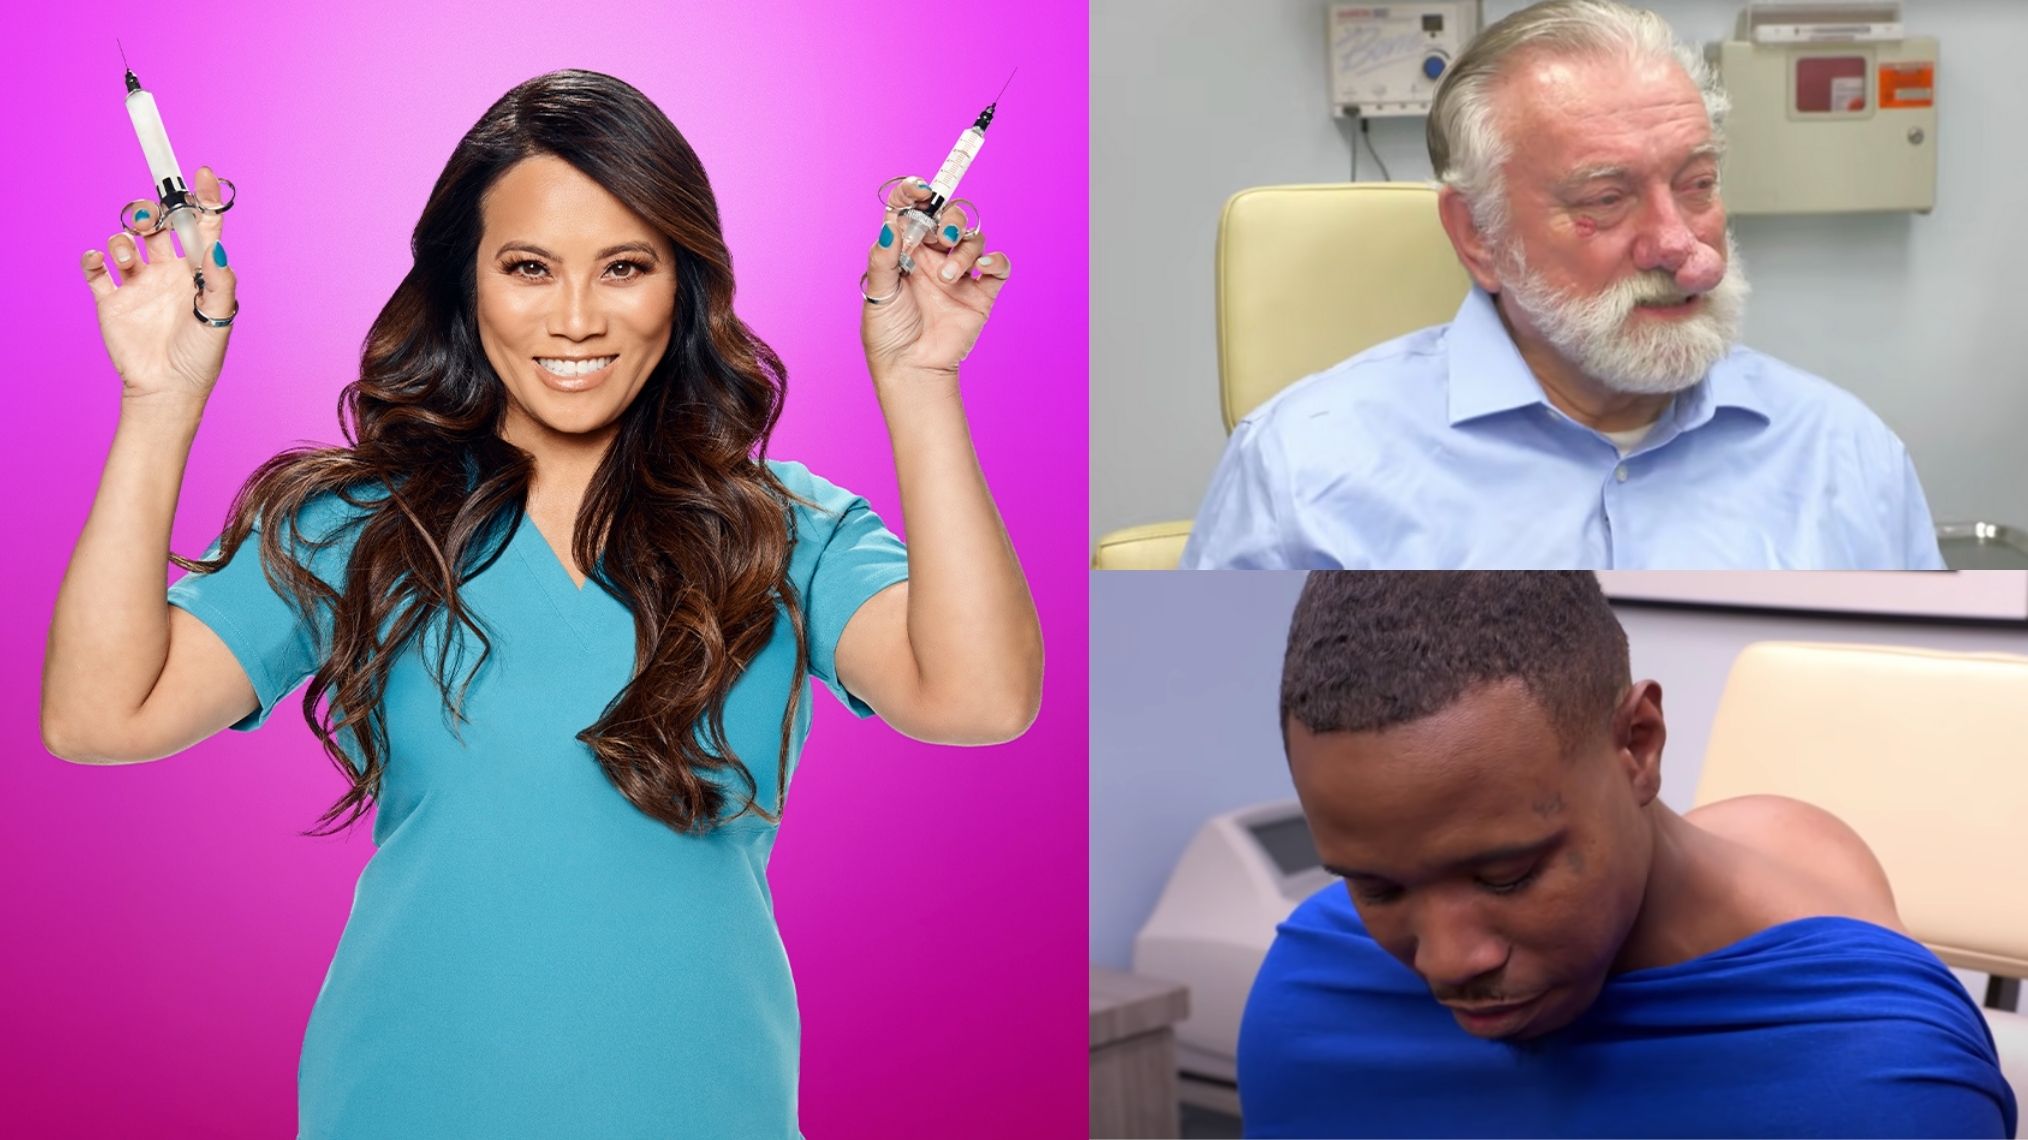 The 10 Most Unforgettable Pimple Popper' Cases (VIDEO)